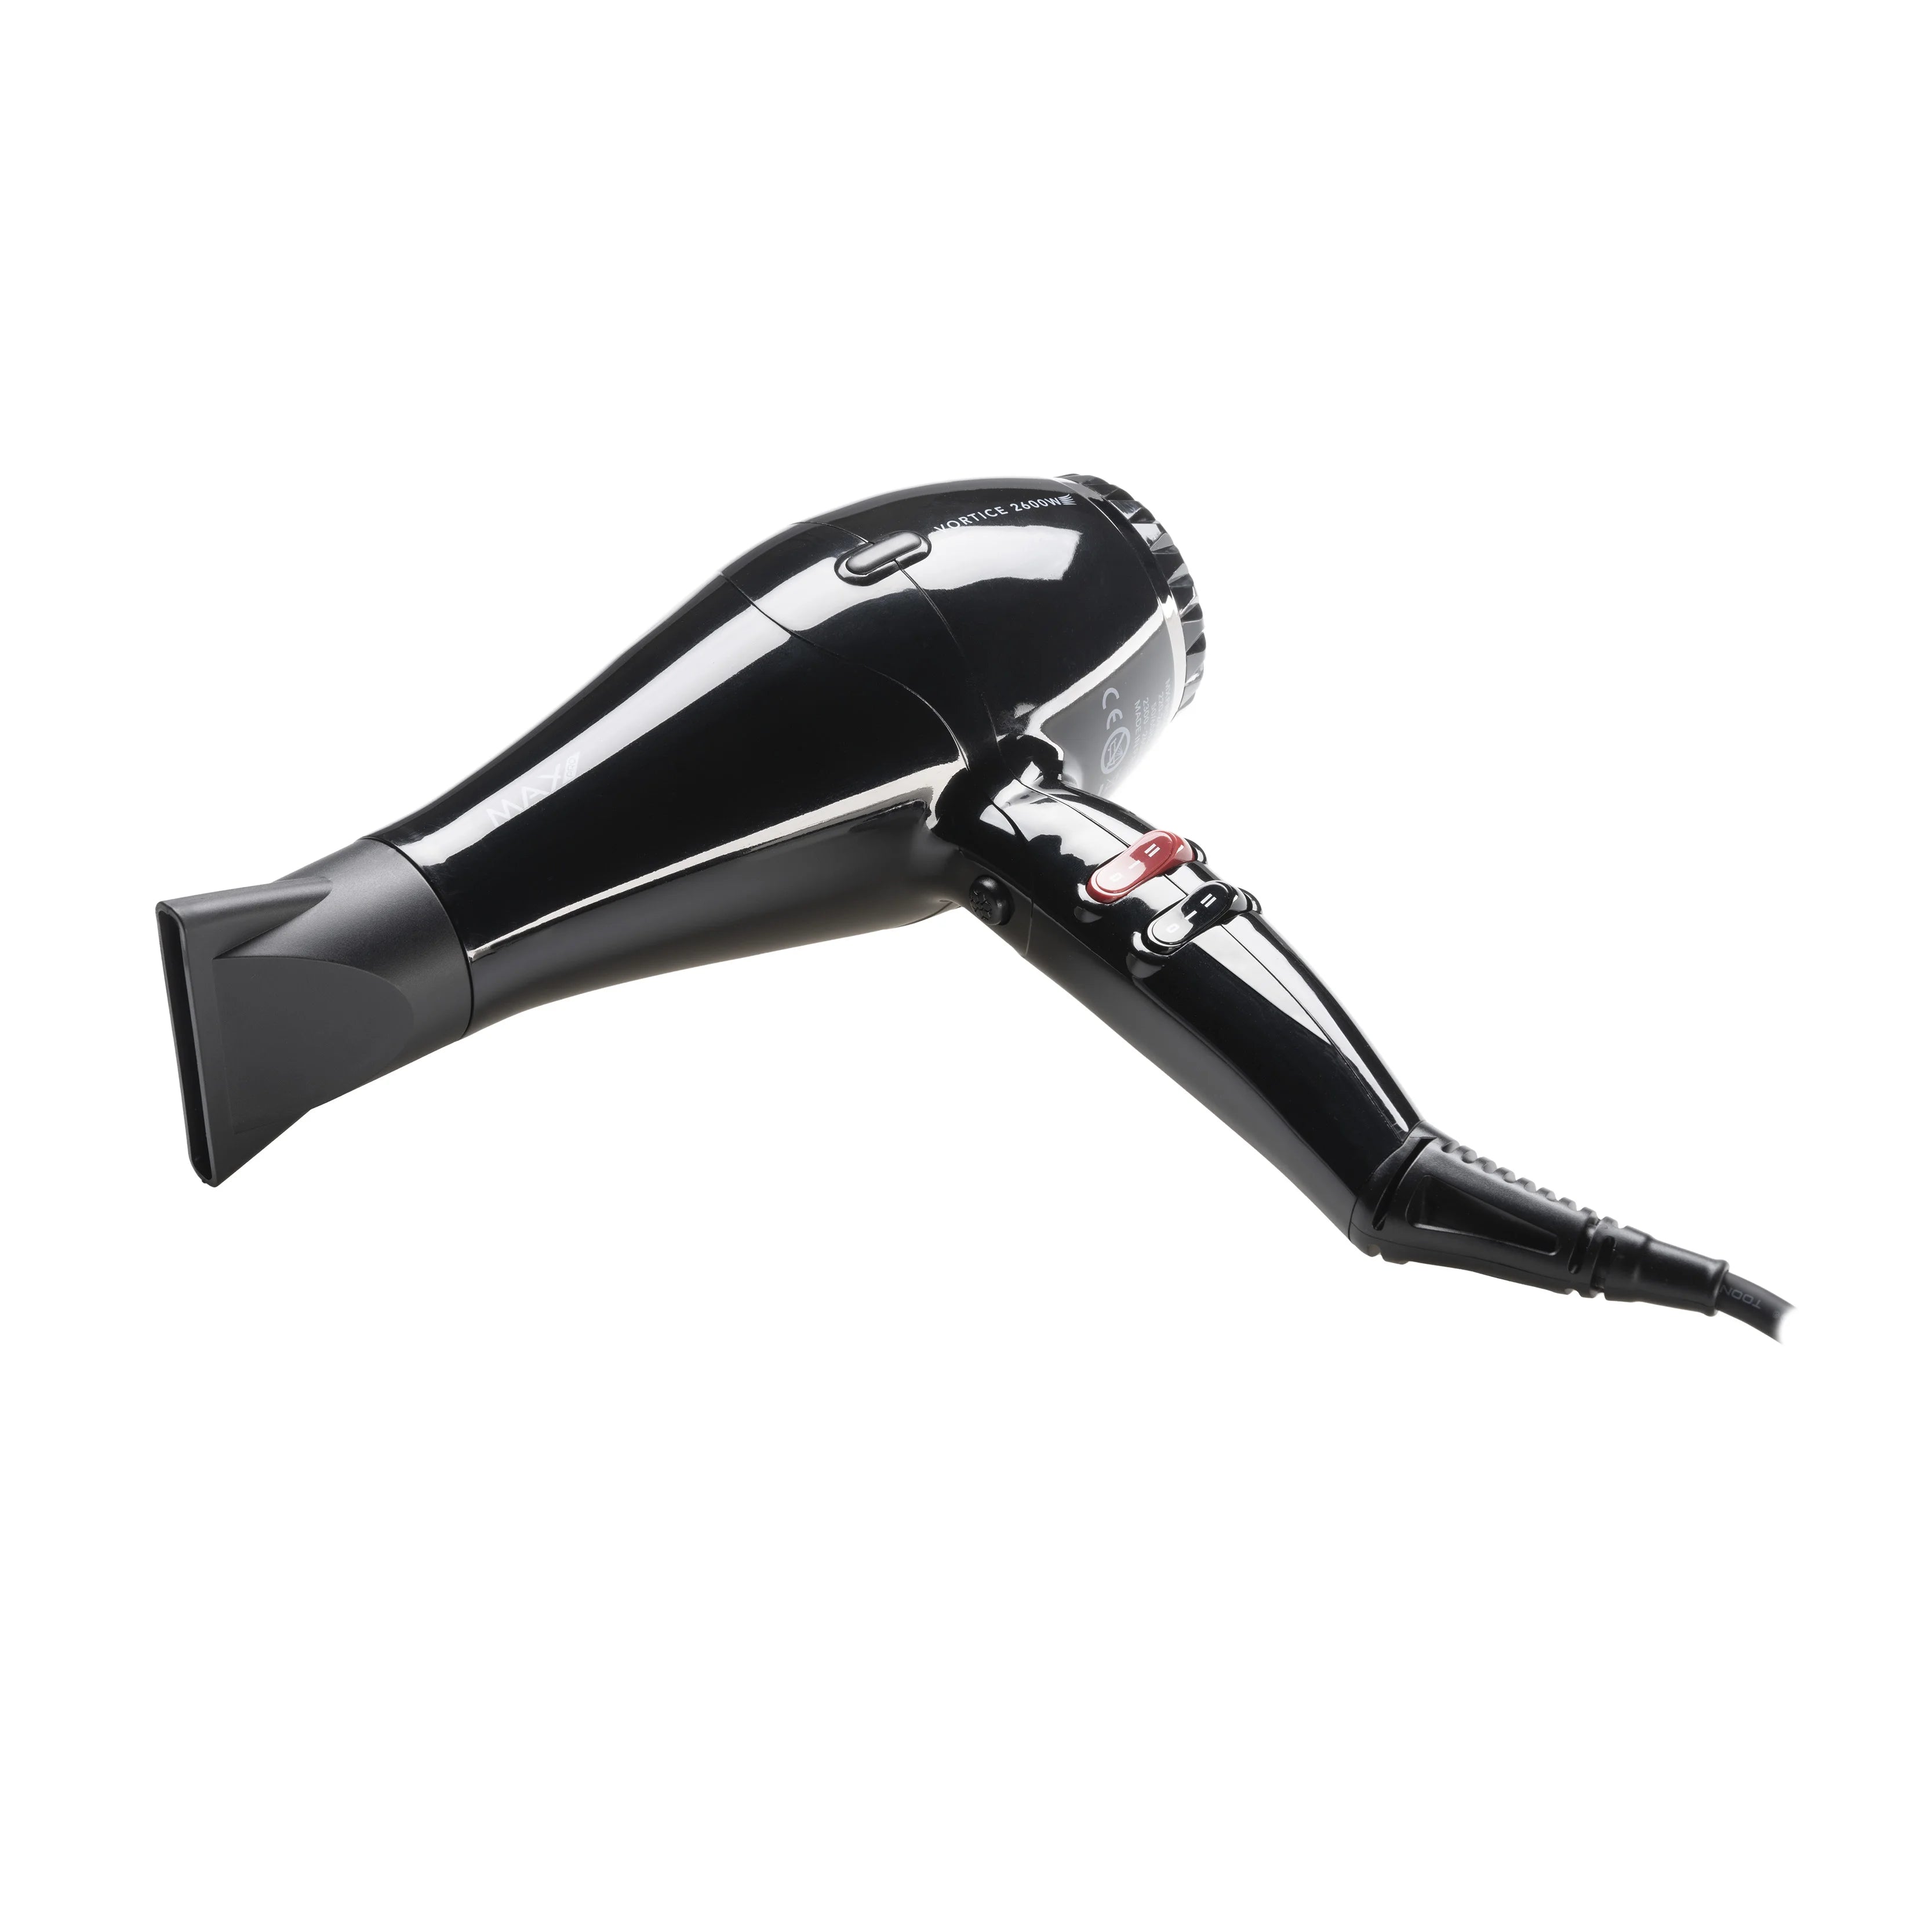 OUTLET Max Pro Vortice Hair Dryer 2600W - Max Pro x MOHI